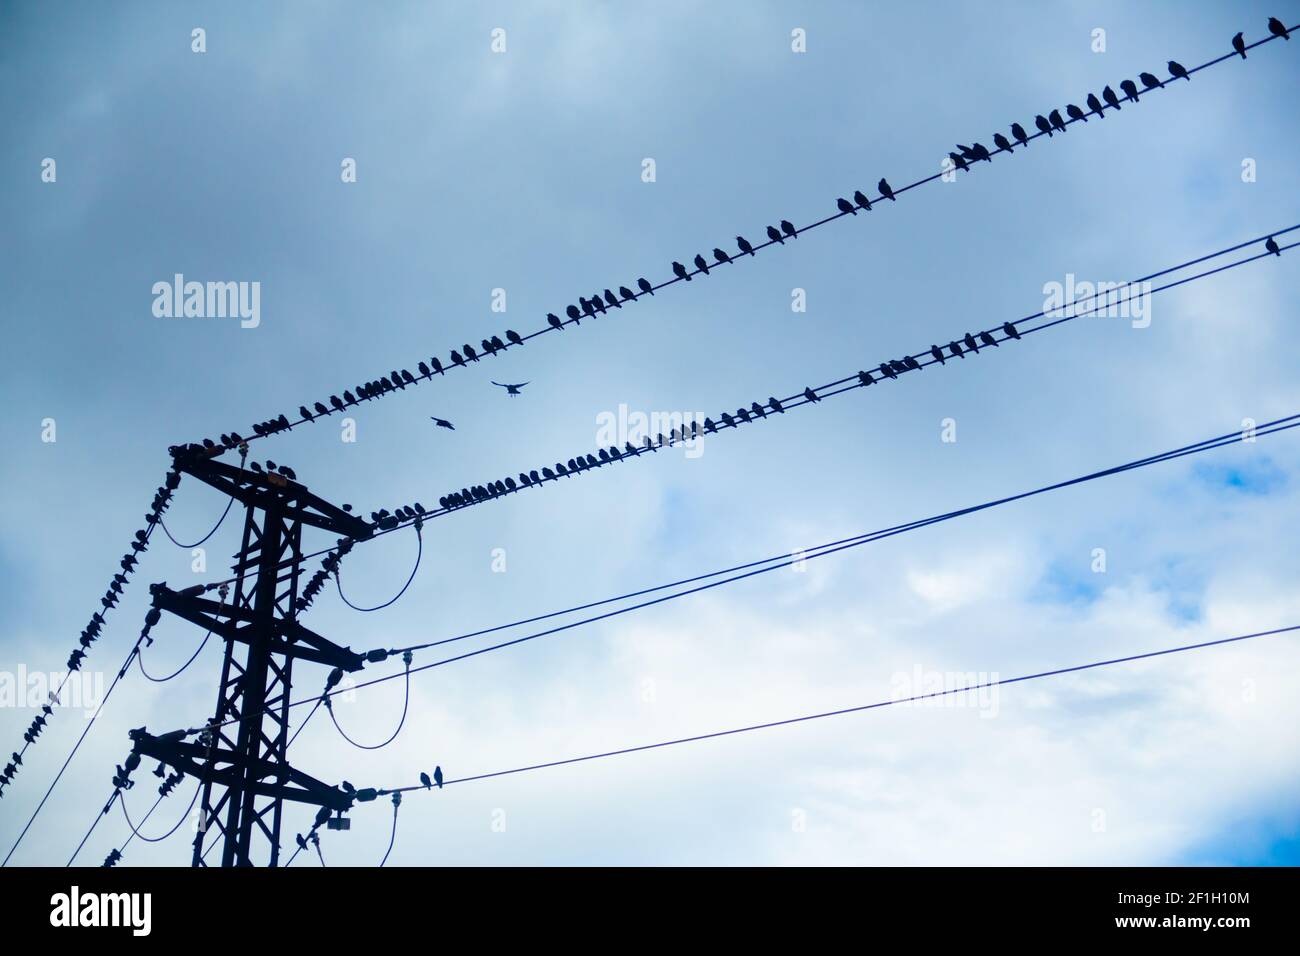 Black birds on electric wires in a cloudy day Stock Photo